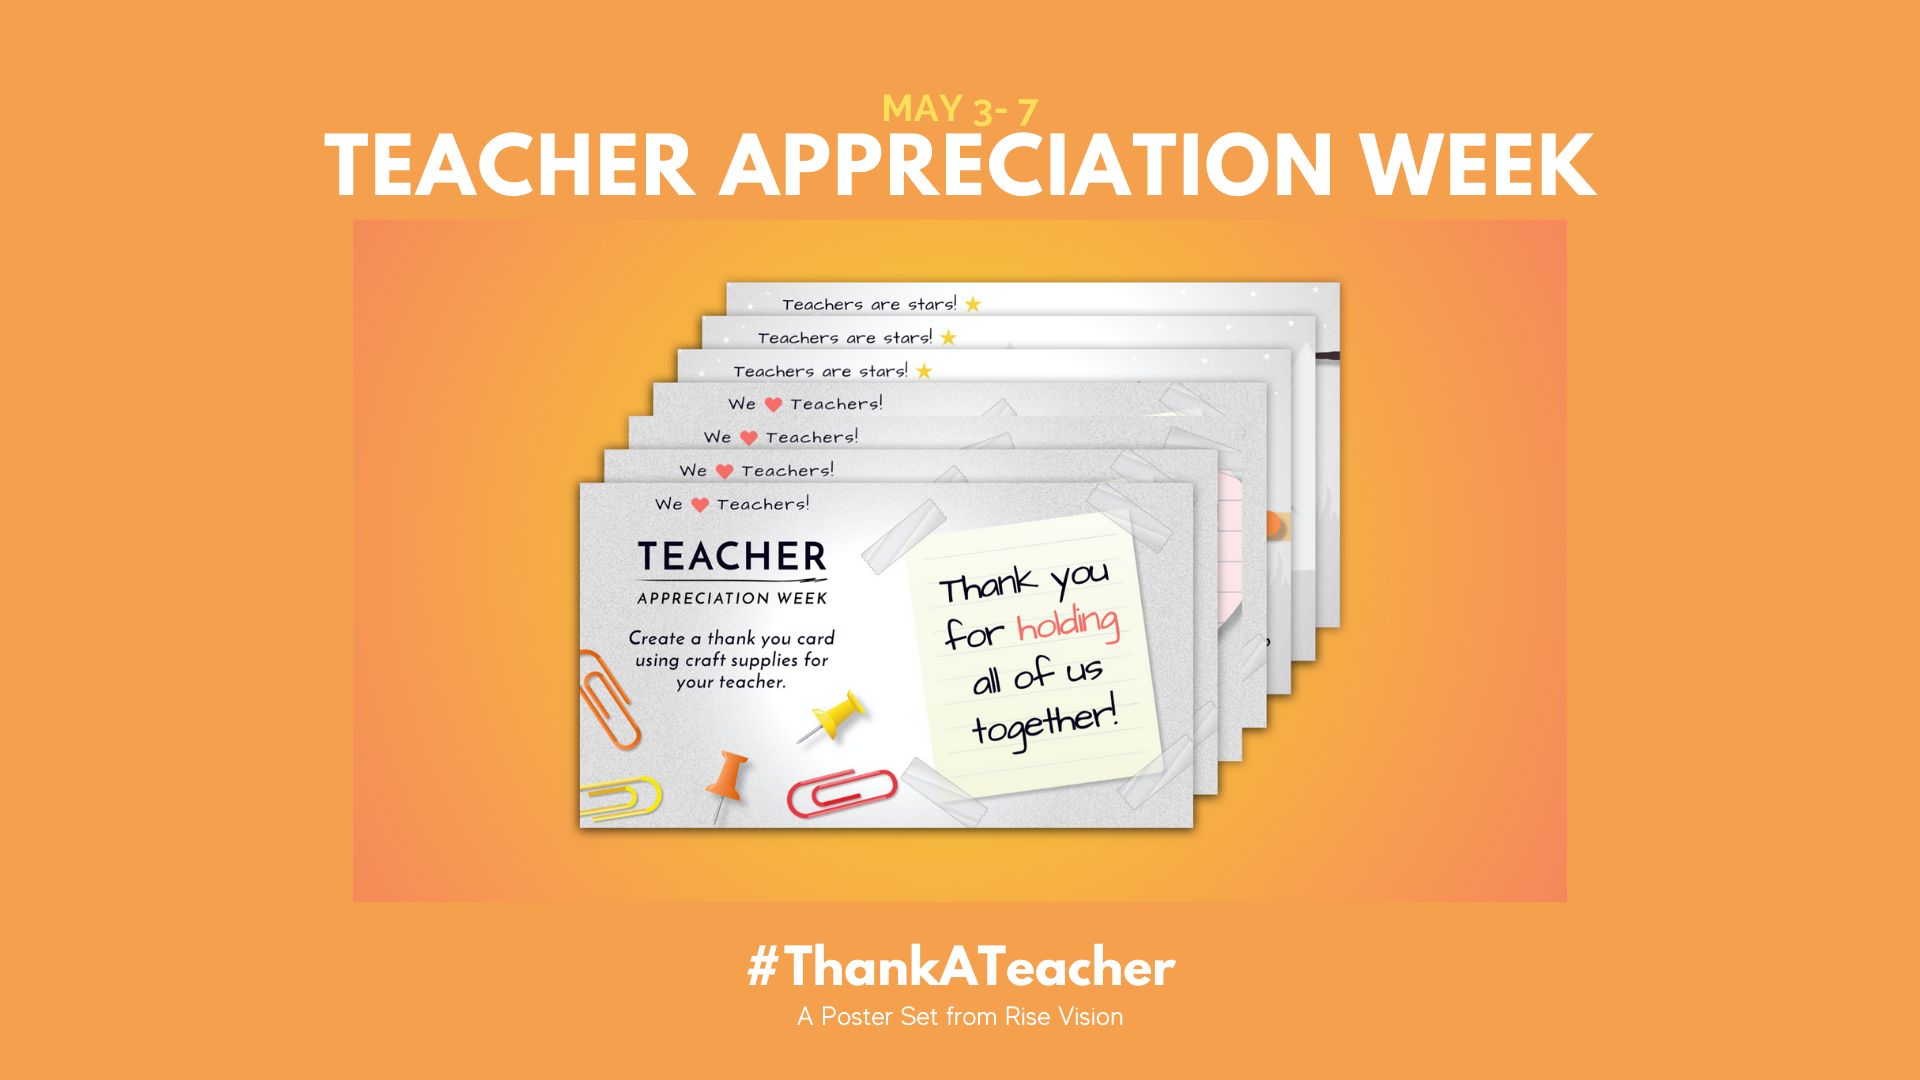 Teacher Appreciation Week Posters from Rise Vision